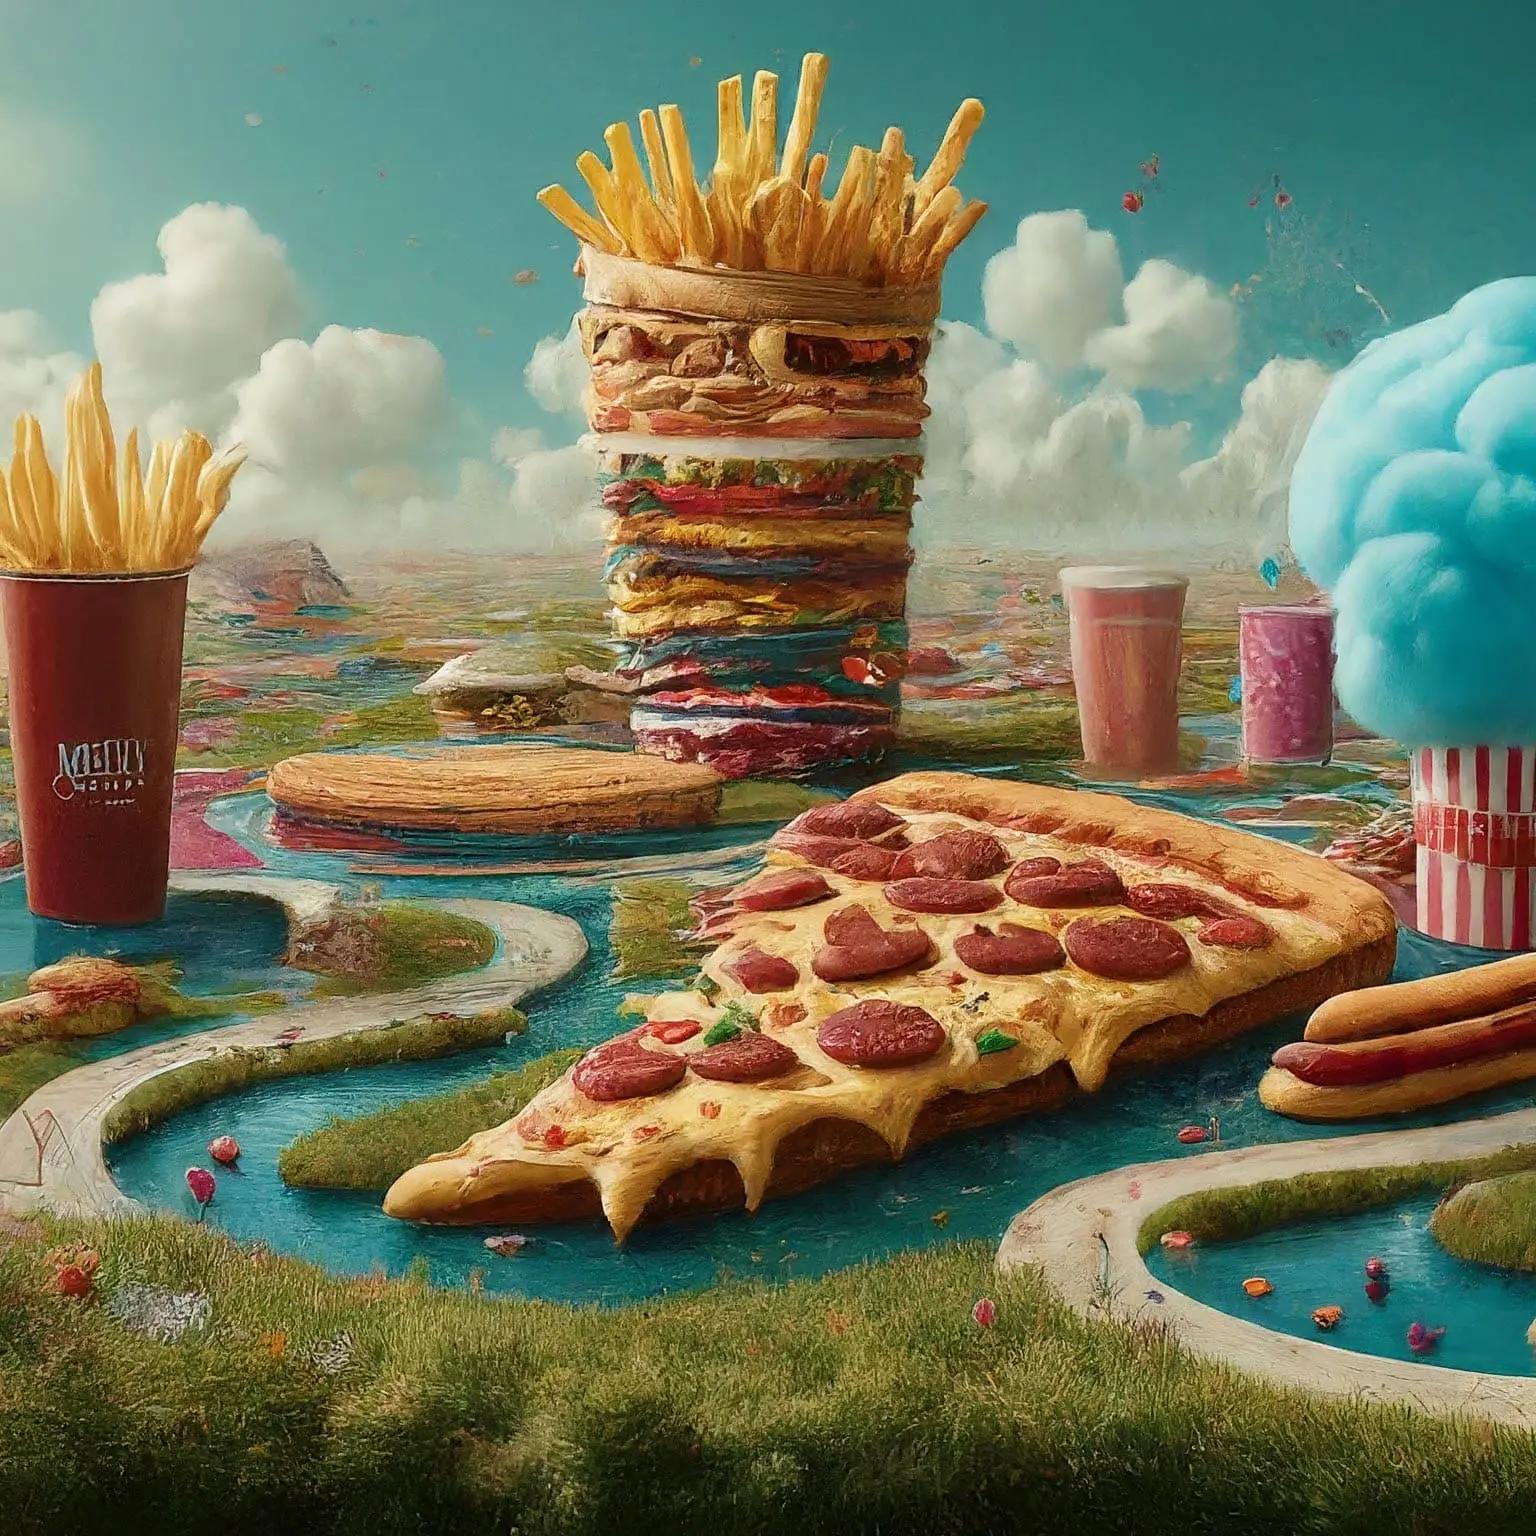 a landscape that matches with our hamburger character, it is portraying a landscape where nature is only fast food